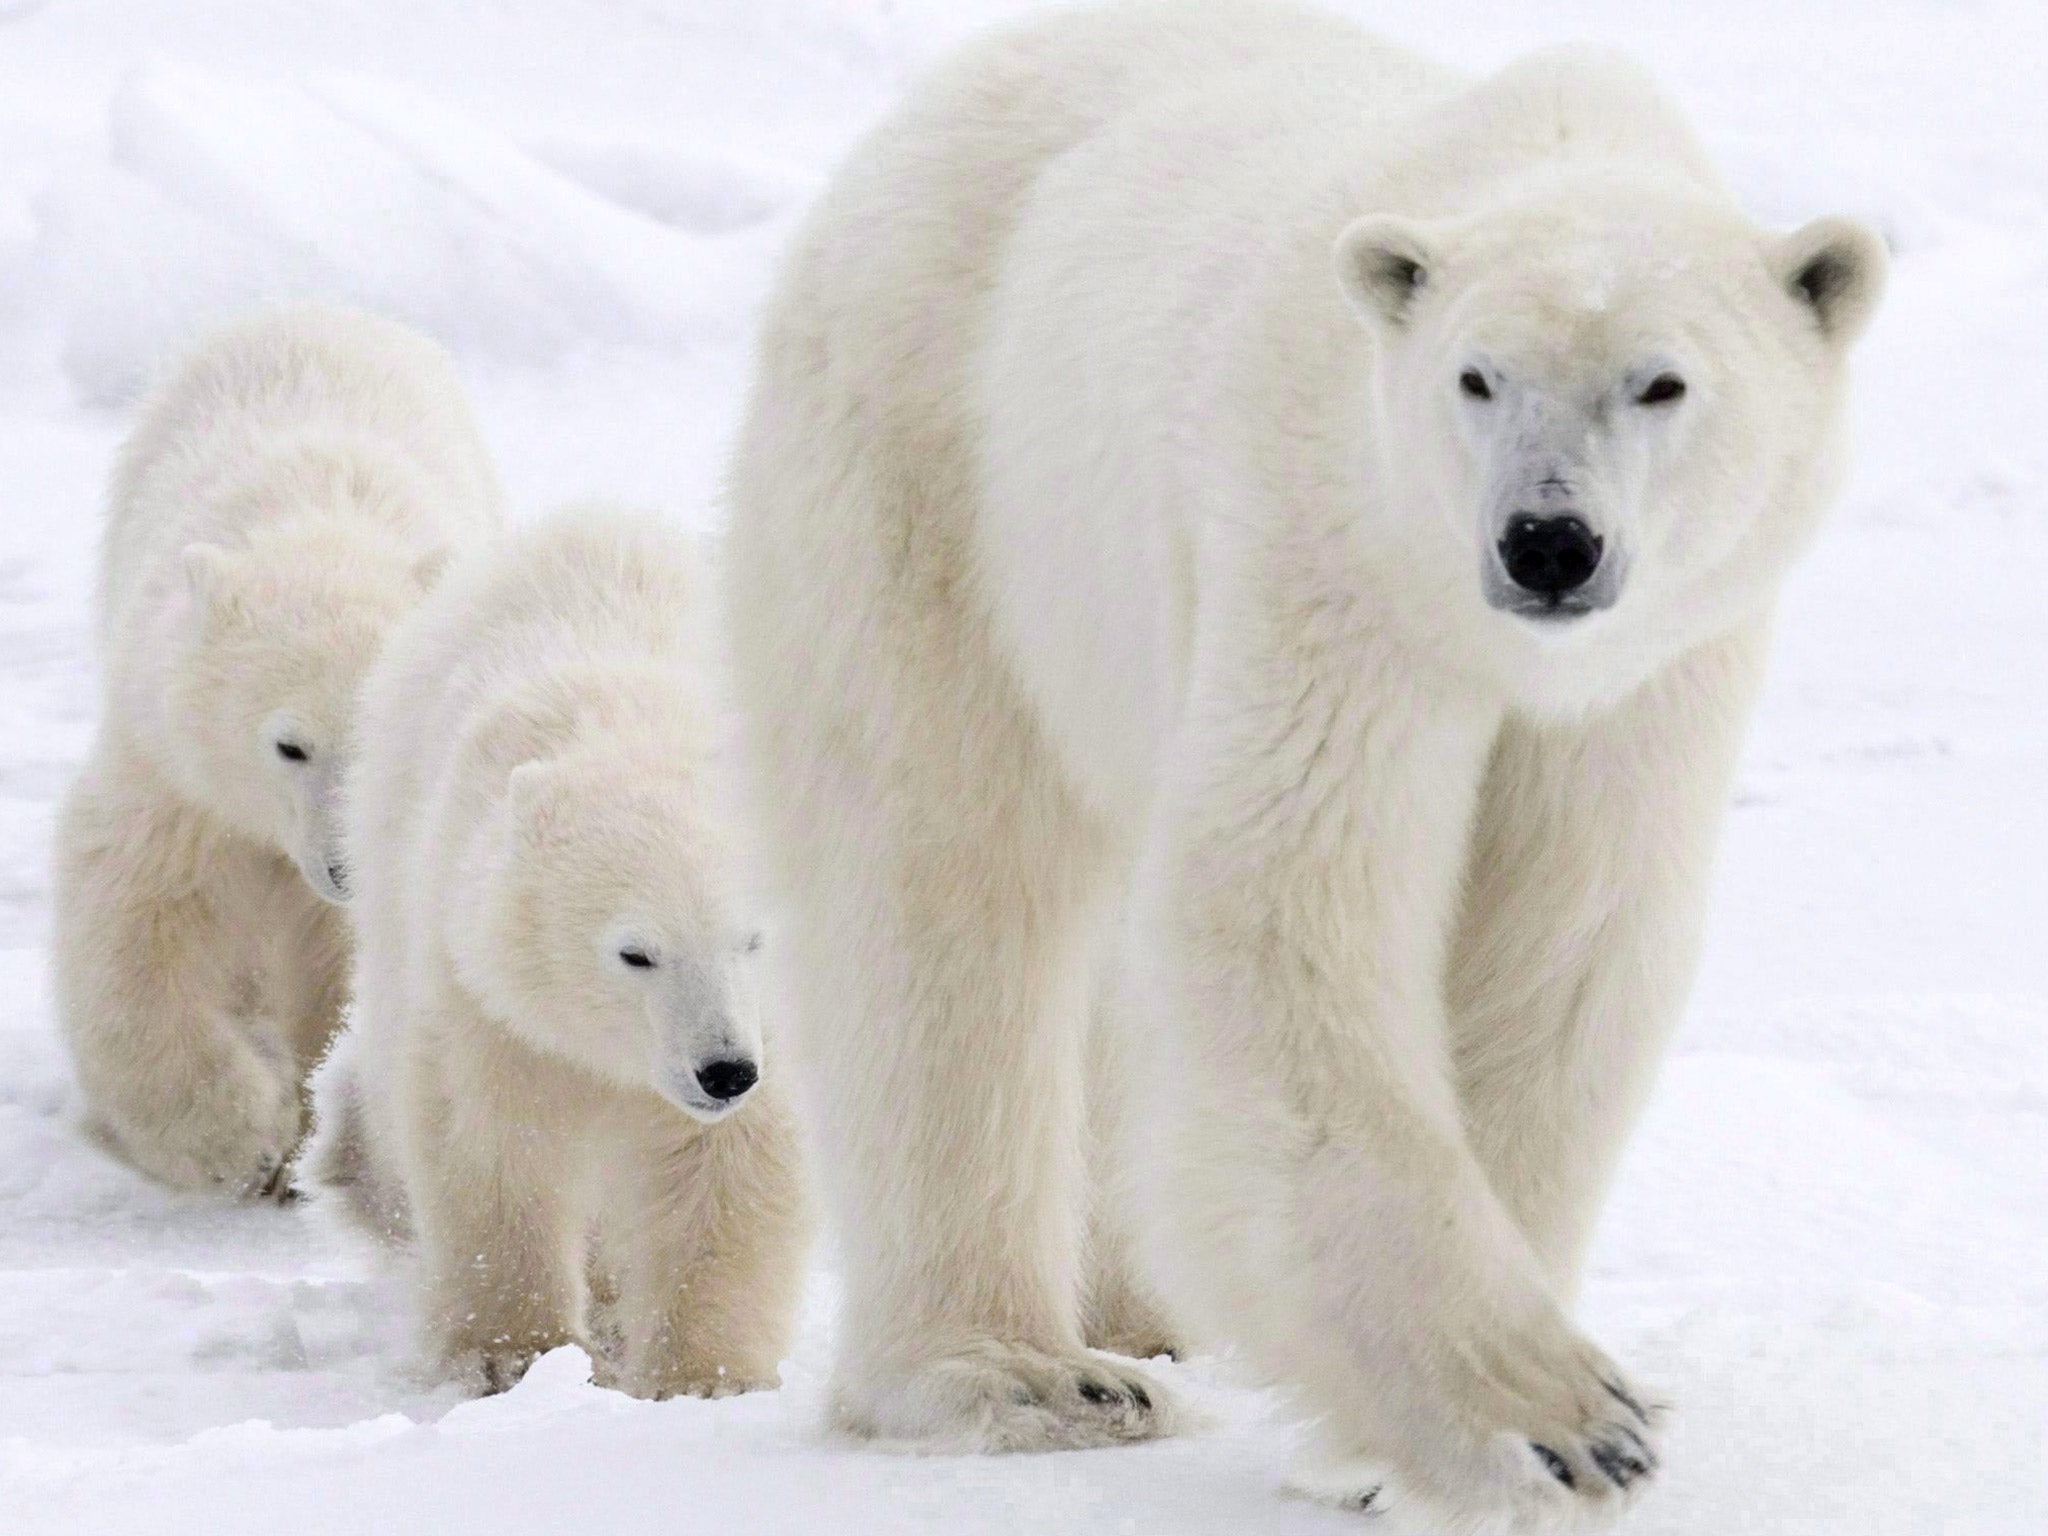 The yearly number of polar bear skins offered at auction increased by 375 per cent between 2007 and 2012